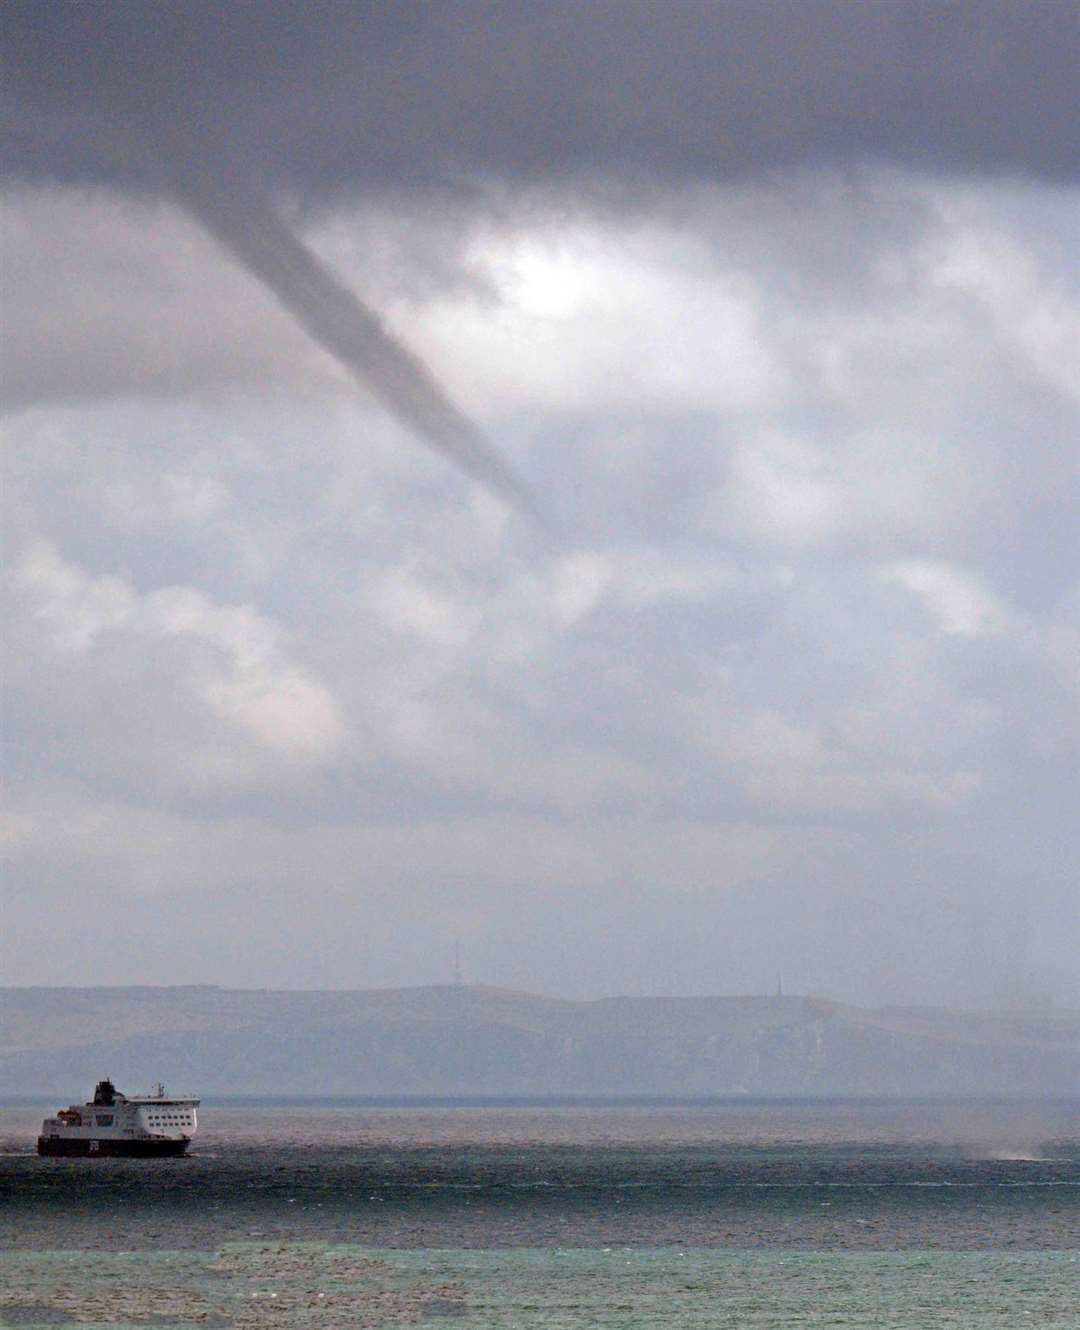 The cyclone gave a passing ferry a near miss. Picture: Paul Jolliffe, Dover Straight Shipping – FotoFlite